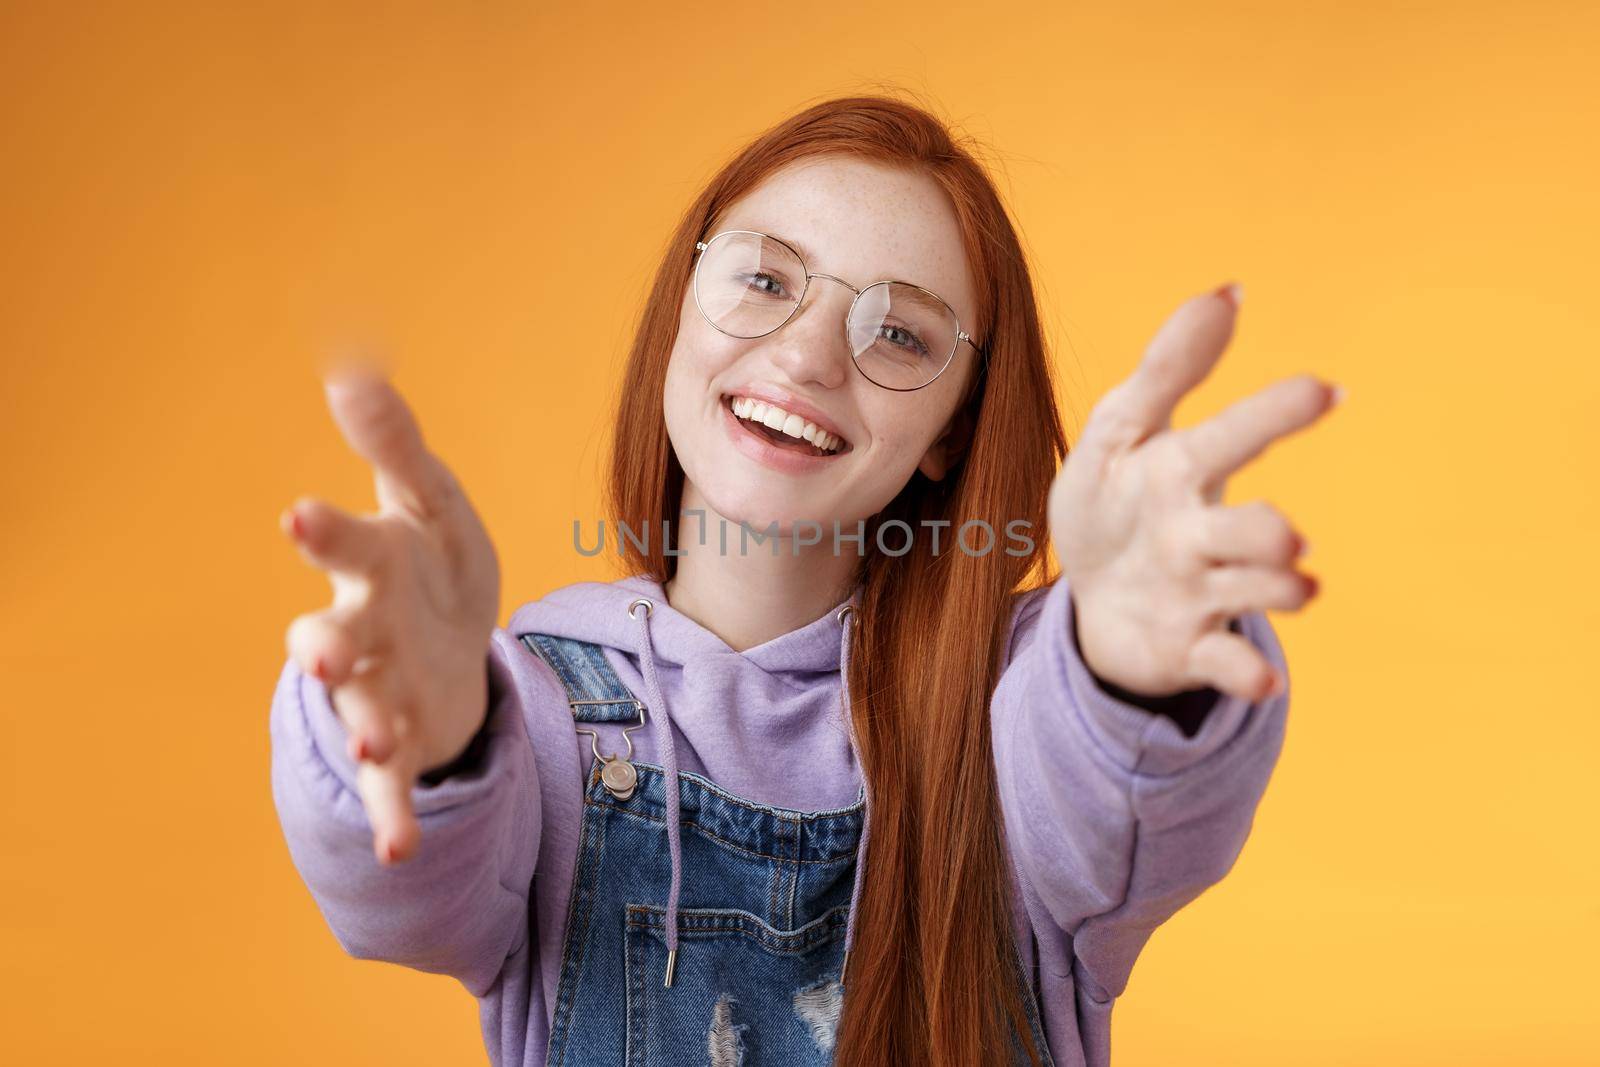 Come here let hold. Attractive silly friendly happy smiling redhead woman stretch arms camera grab product wanna tight friendship hugs grinning embracing cuddling besties, orange background.